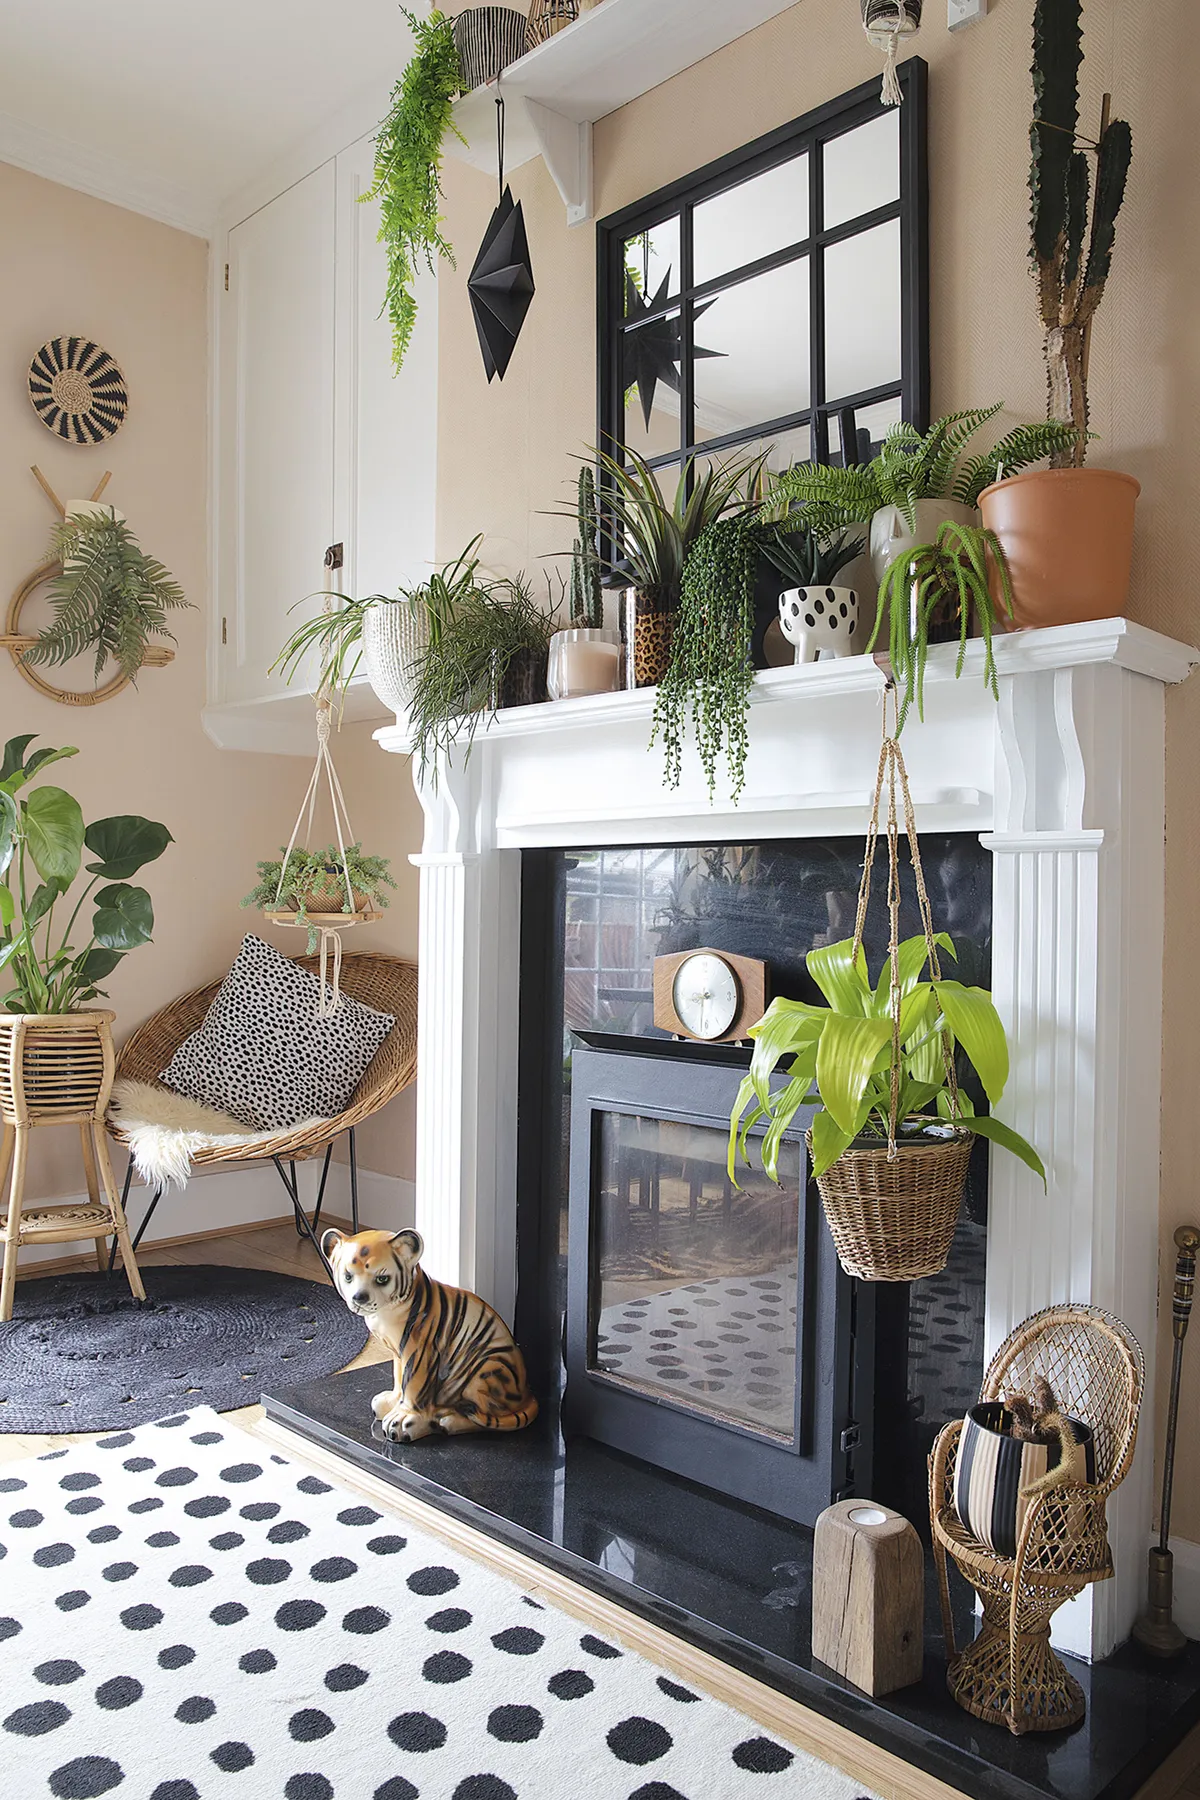 ‘I painted the wooden fire surround black to start with, but it looks miles better white, as it makes the plants stand out more,’ says Leanne. The Crittall- style mirror is from Home Bargains and the walls are painted in Johnstone’s Oatcake